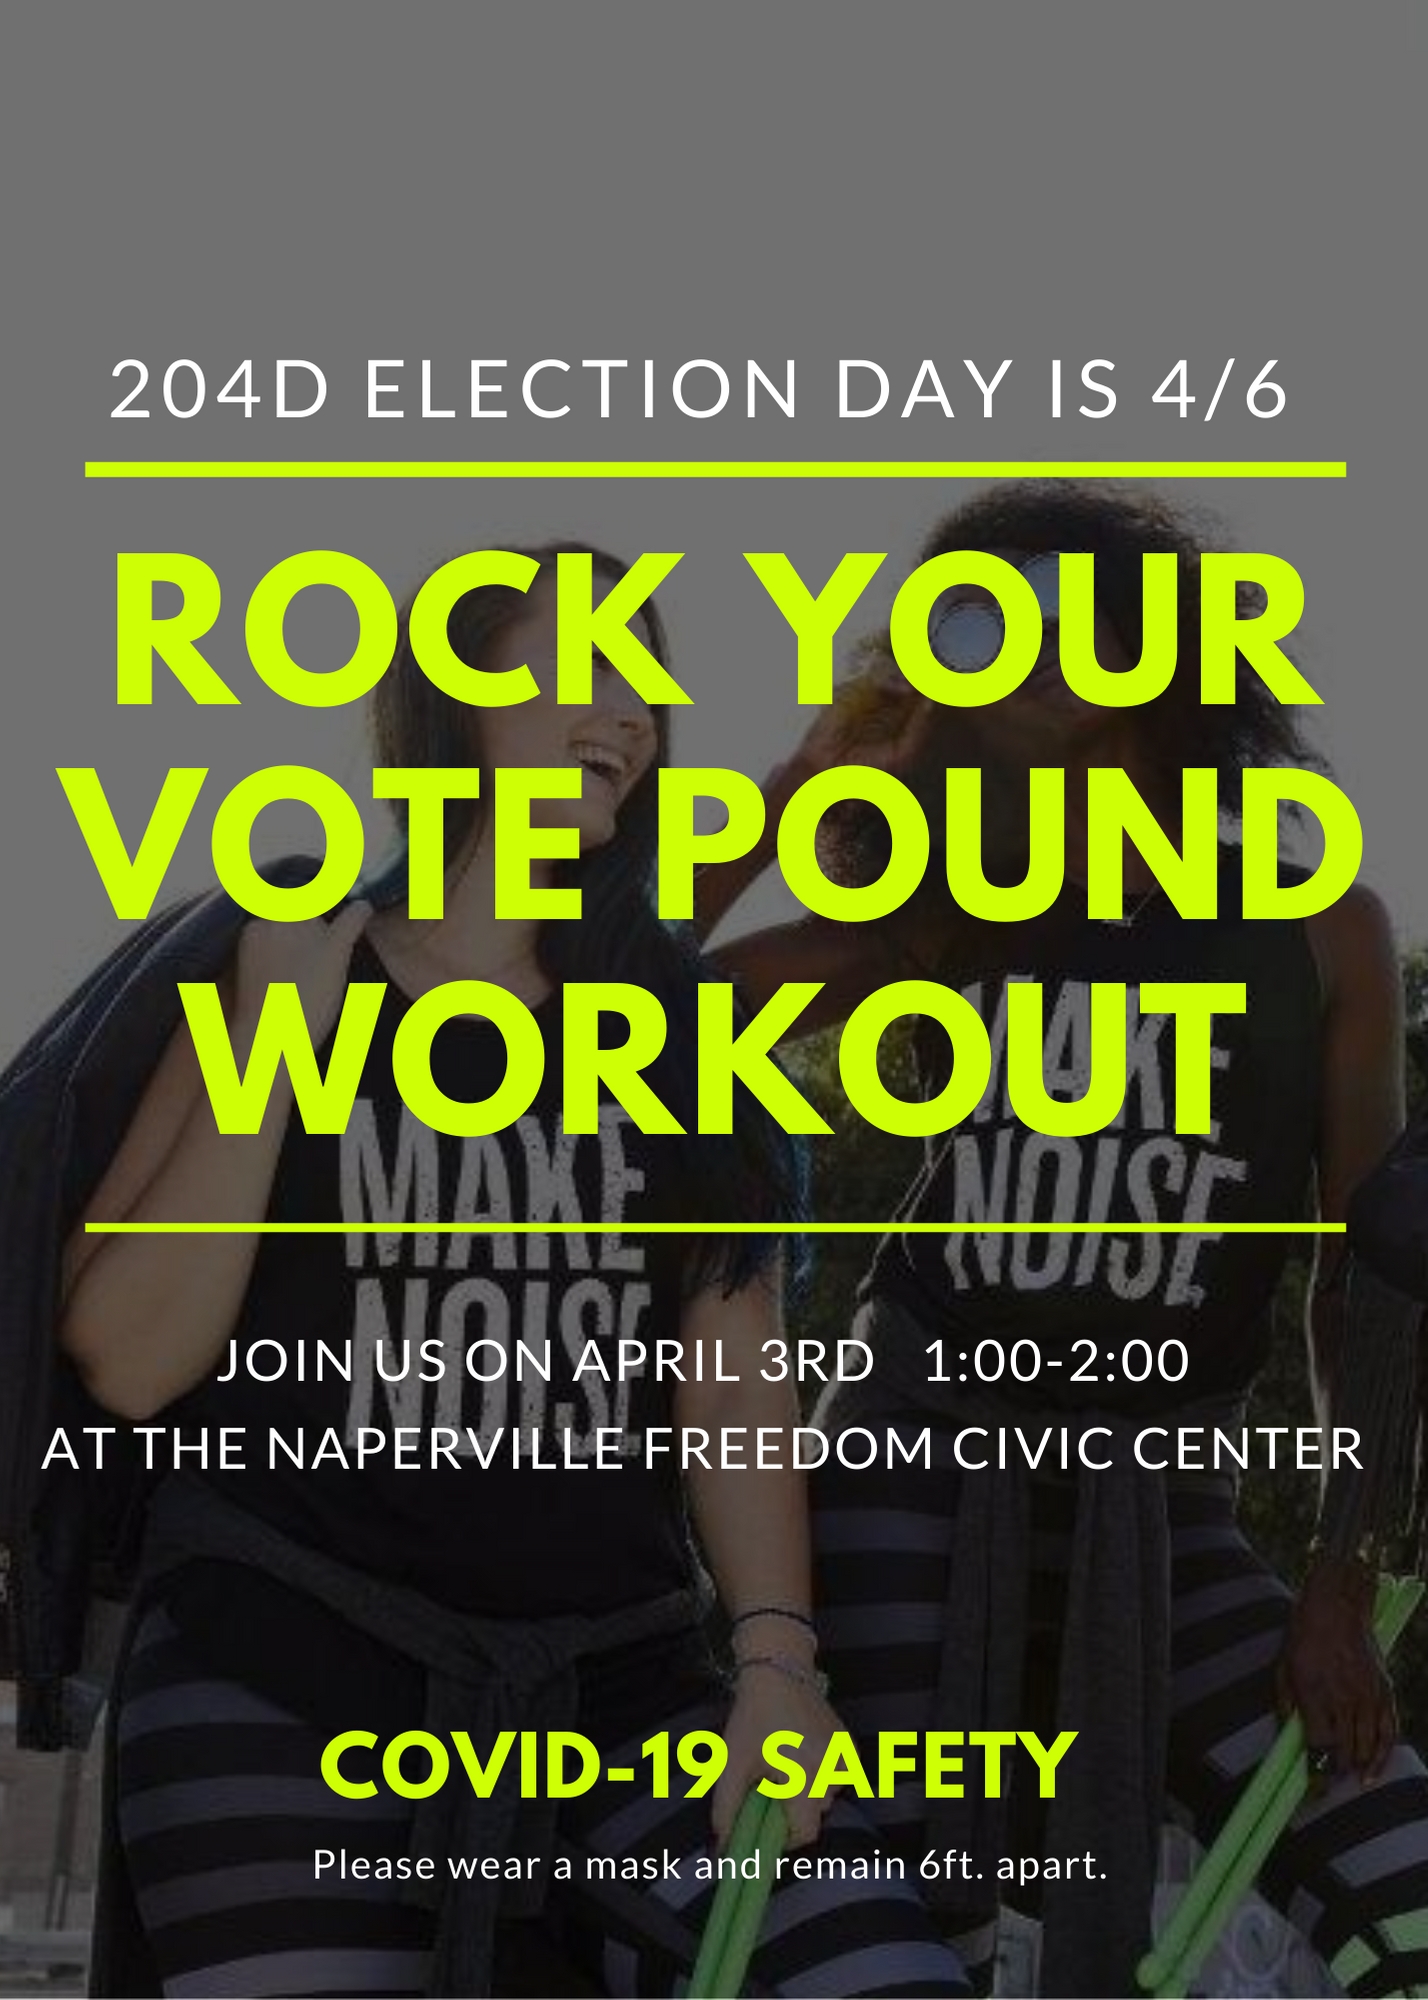 Rock Your Vote Pound Workout